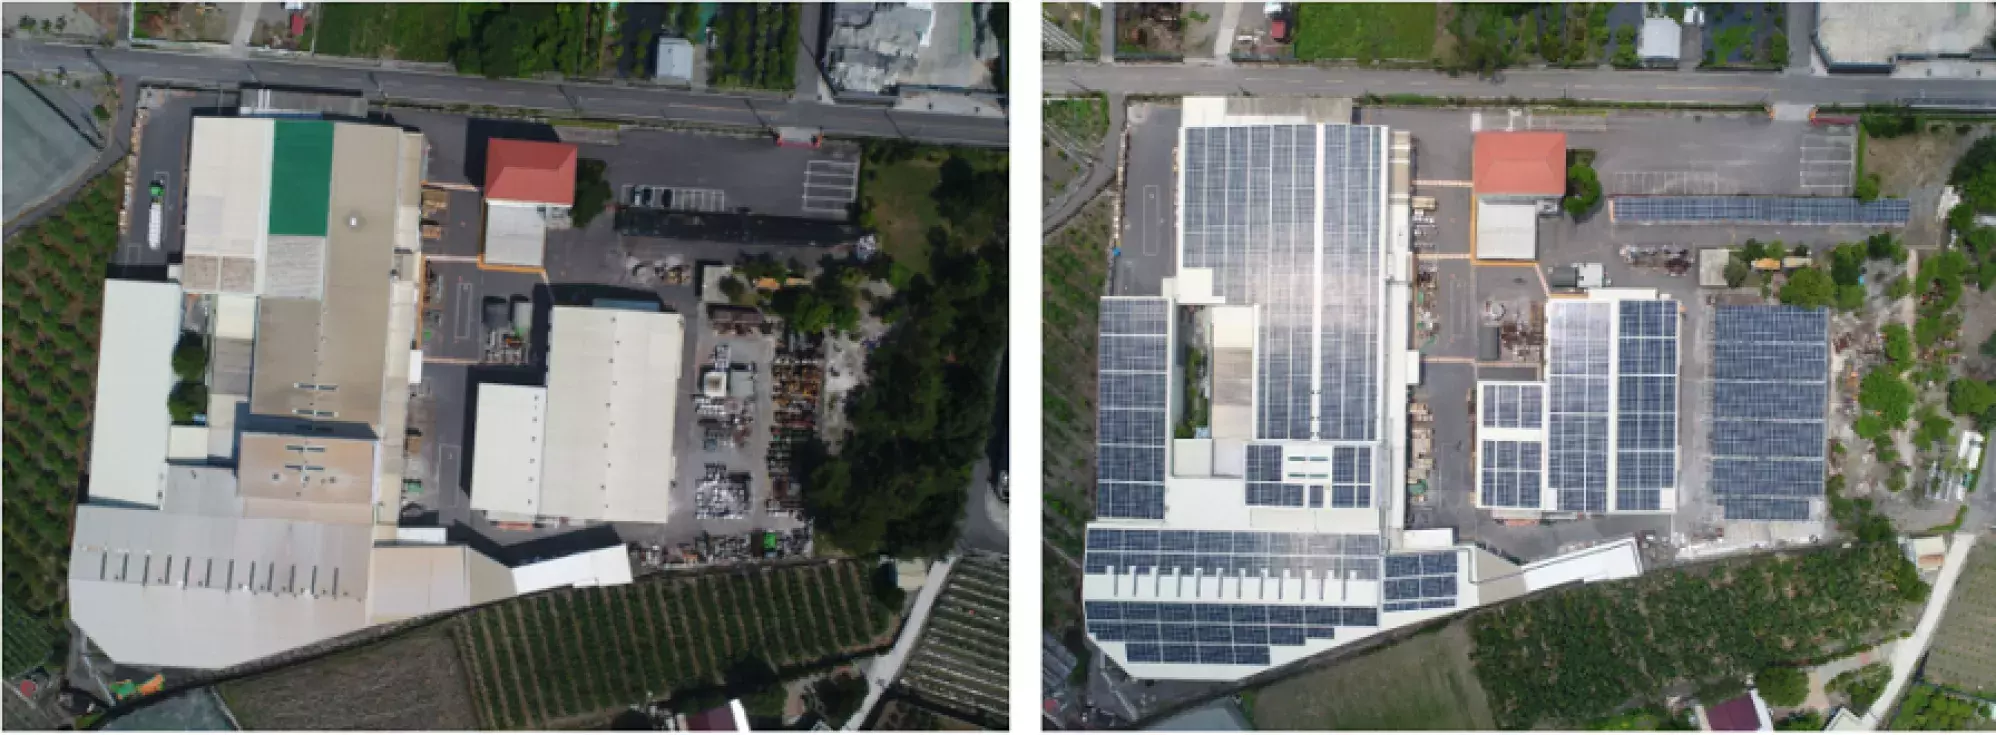 Aerial view of the plant before and after the installation of the solar panels    A renewable energy company was chosen to lead the project because of its experience in solar power. Albert comments: “Collaborating with external experts was important to us as we wanted to complete the project to the highest standard.” The installation was performed within four months.   “I’m happy we were able to come together successfully under the goal of providing green electricity and having a positive impact on the environment,” says Albert. “The teams worked very closely and very hard during the entire process, and we’re all so proud of this achievement.” 